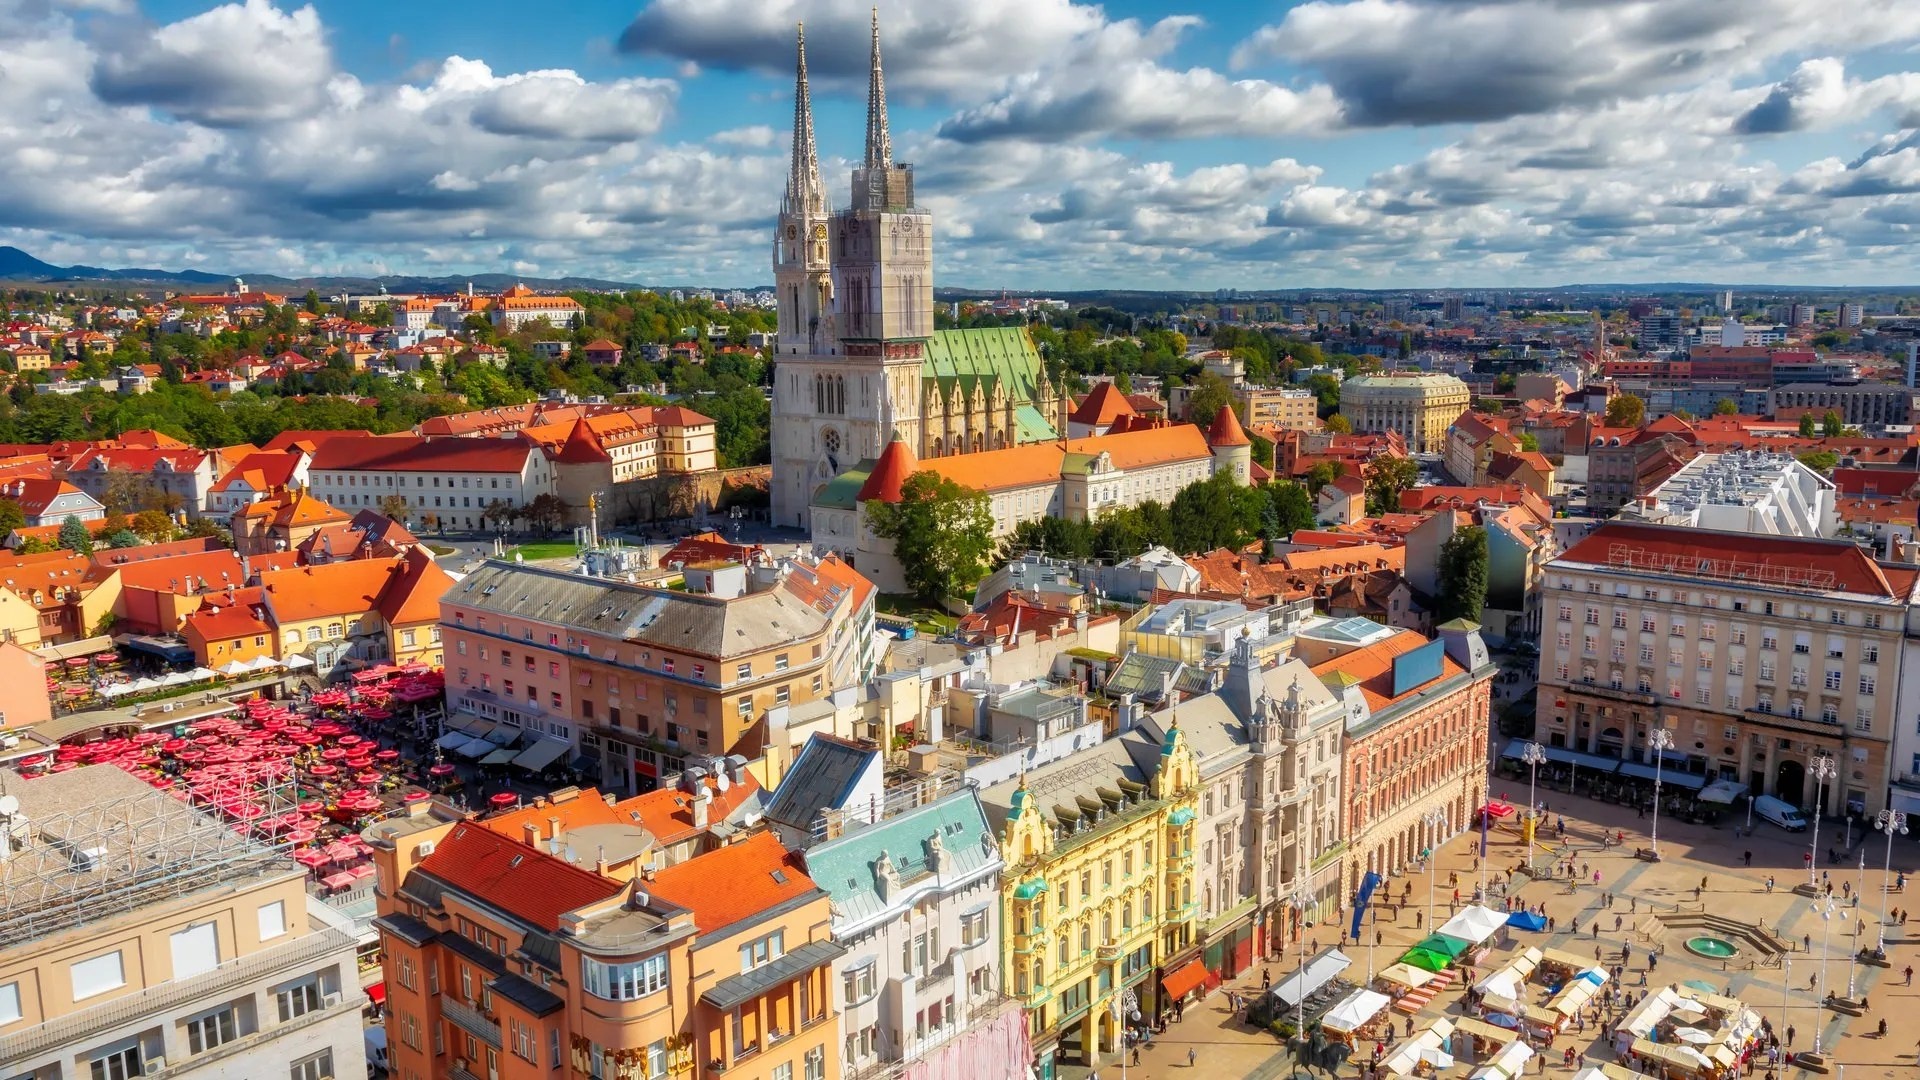 Fun-filled holiday, Zagreb travel experiences, Bookaway recommendations, Exciting activities, 1920x1080 Full HD Desktop